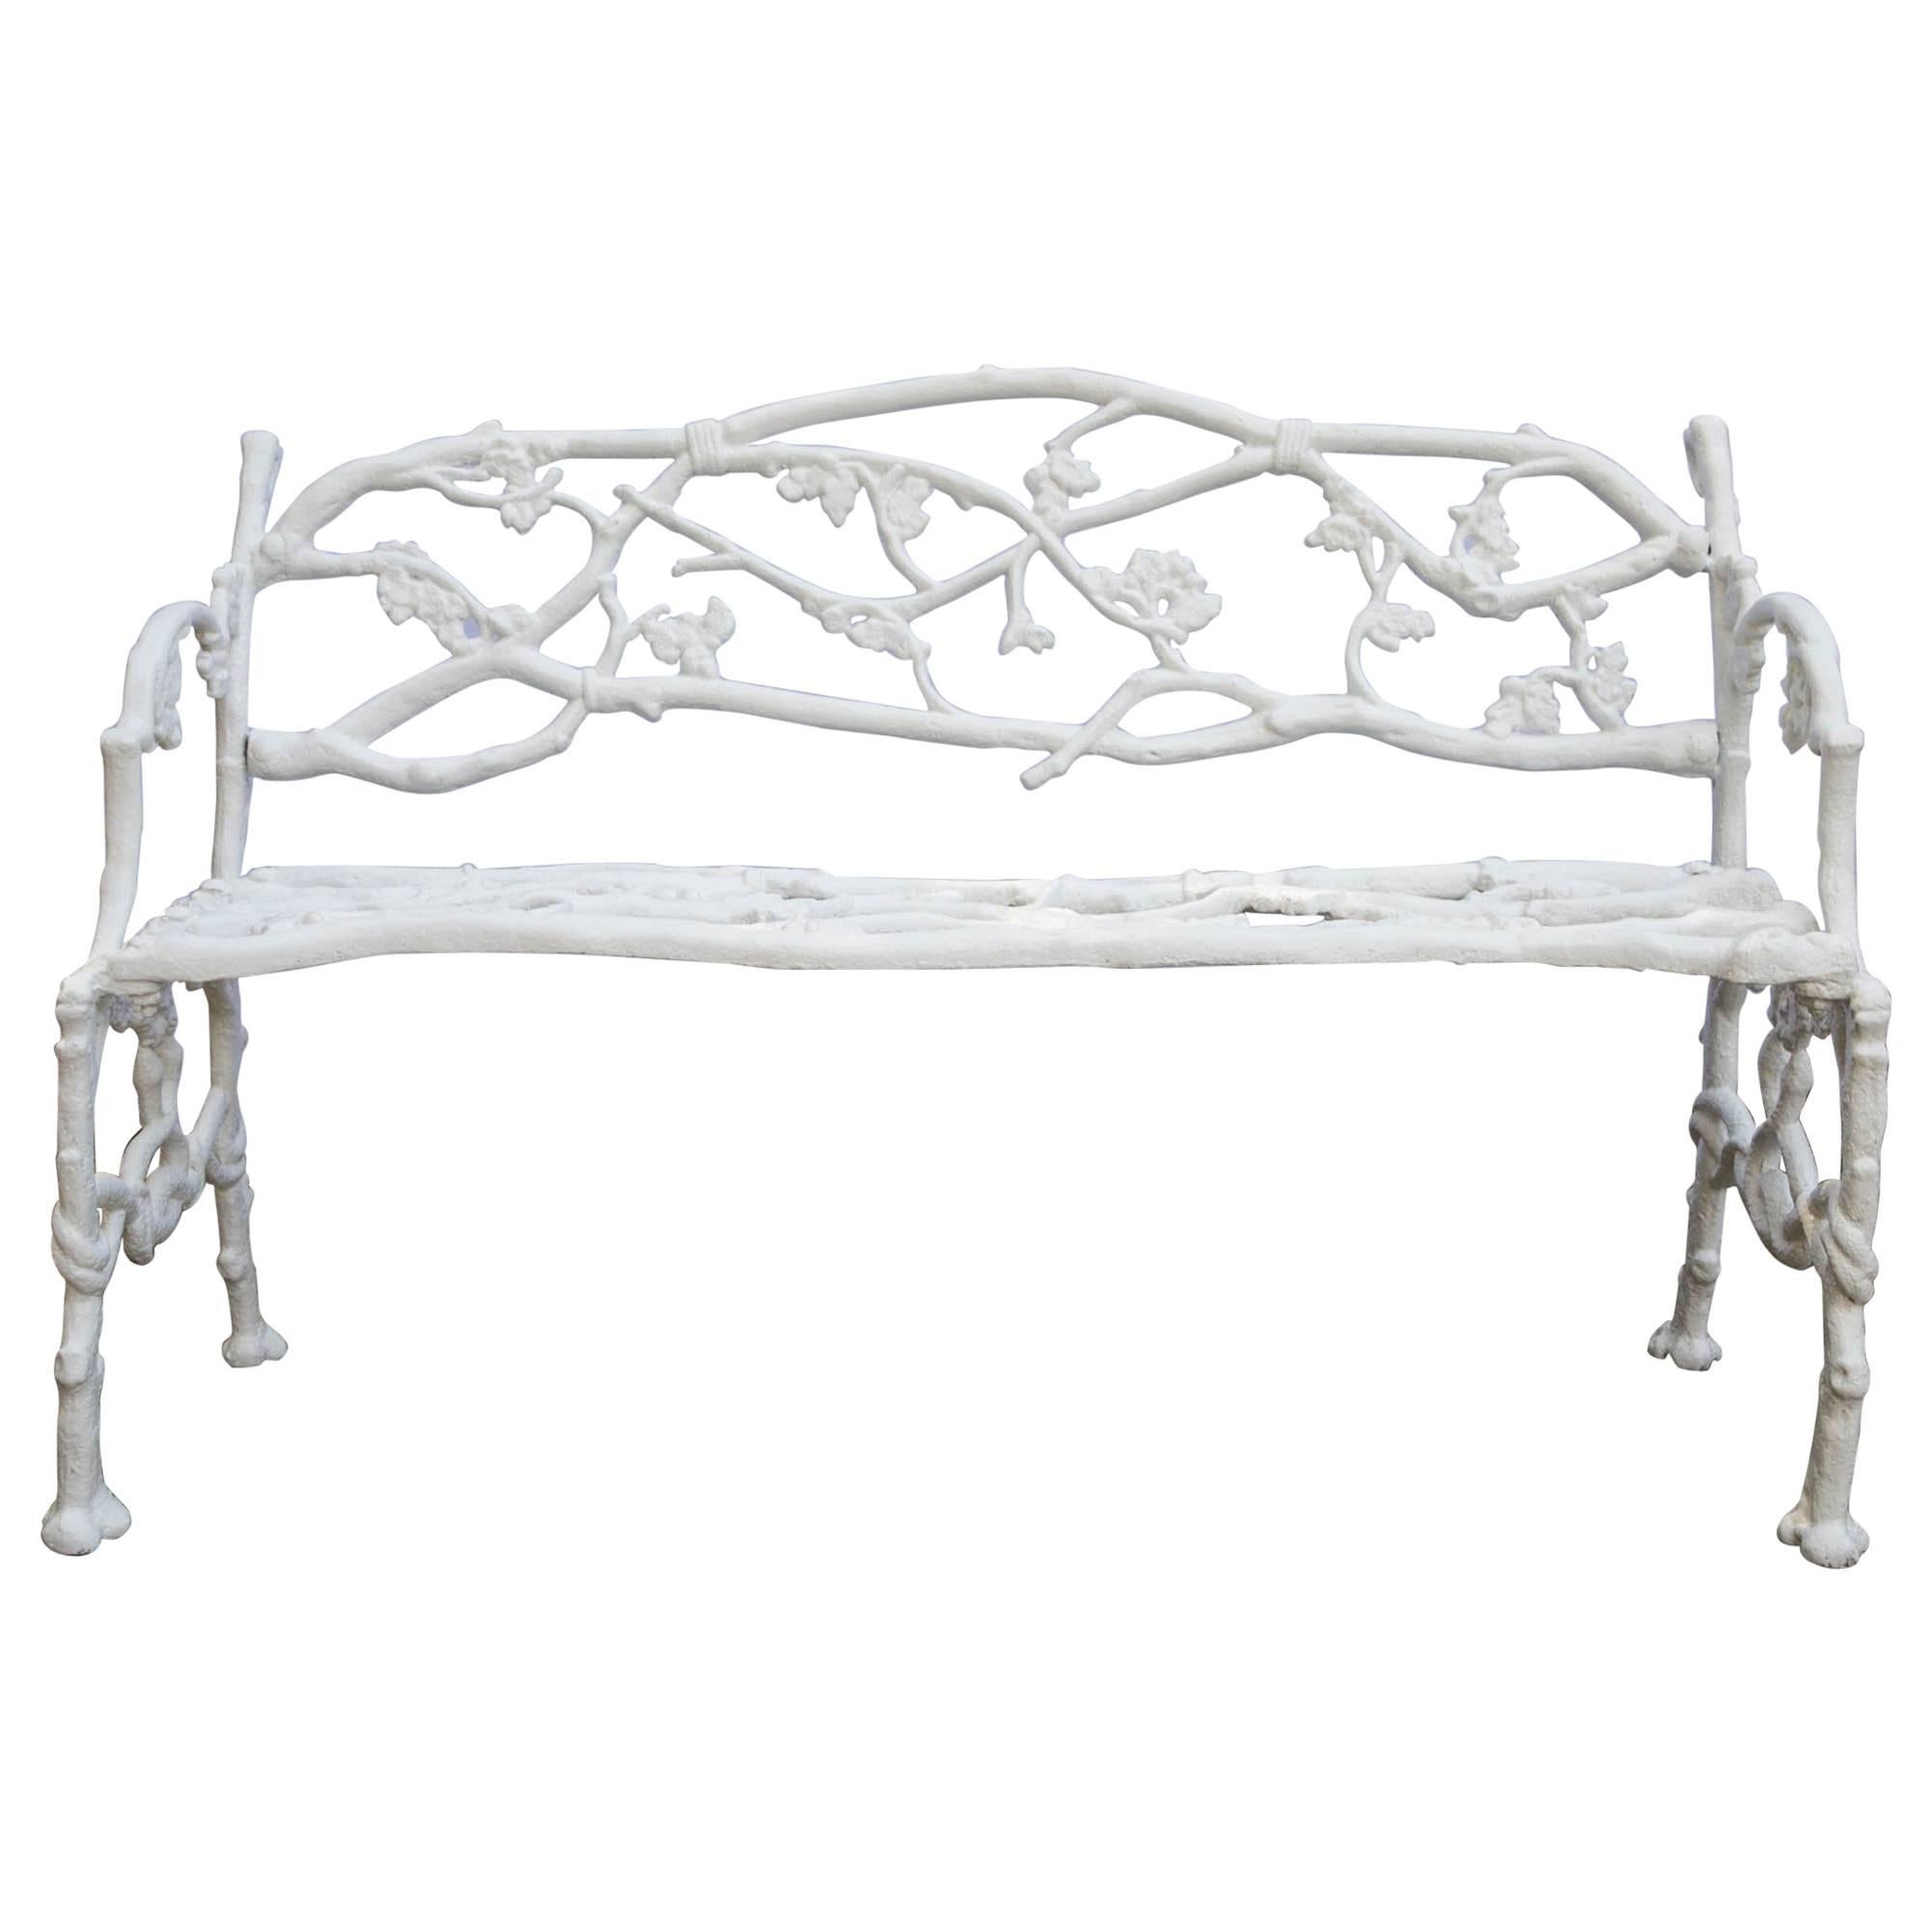  Cast Iron Floral Garden Bench For Sale